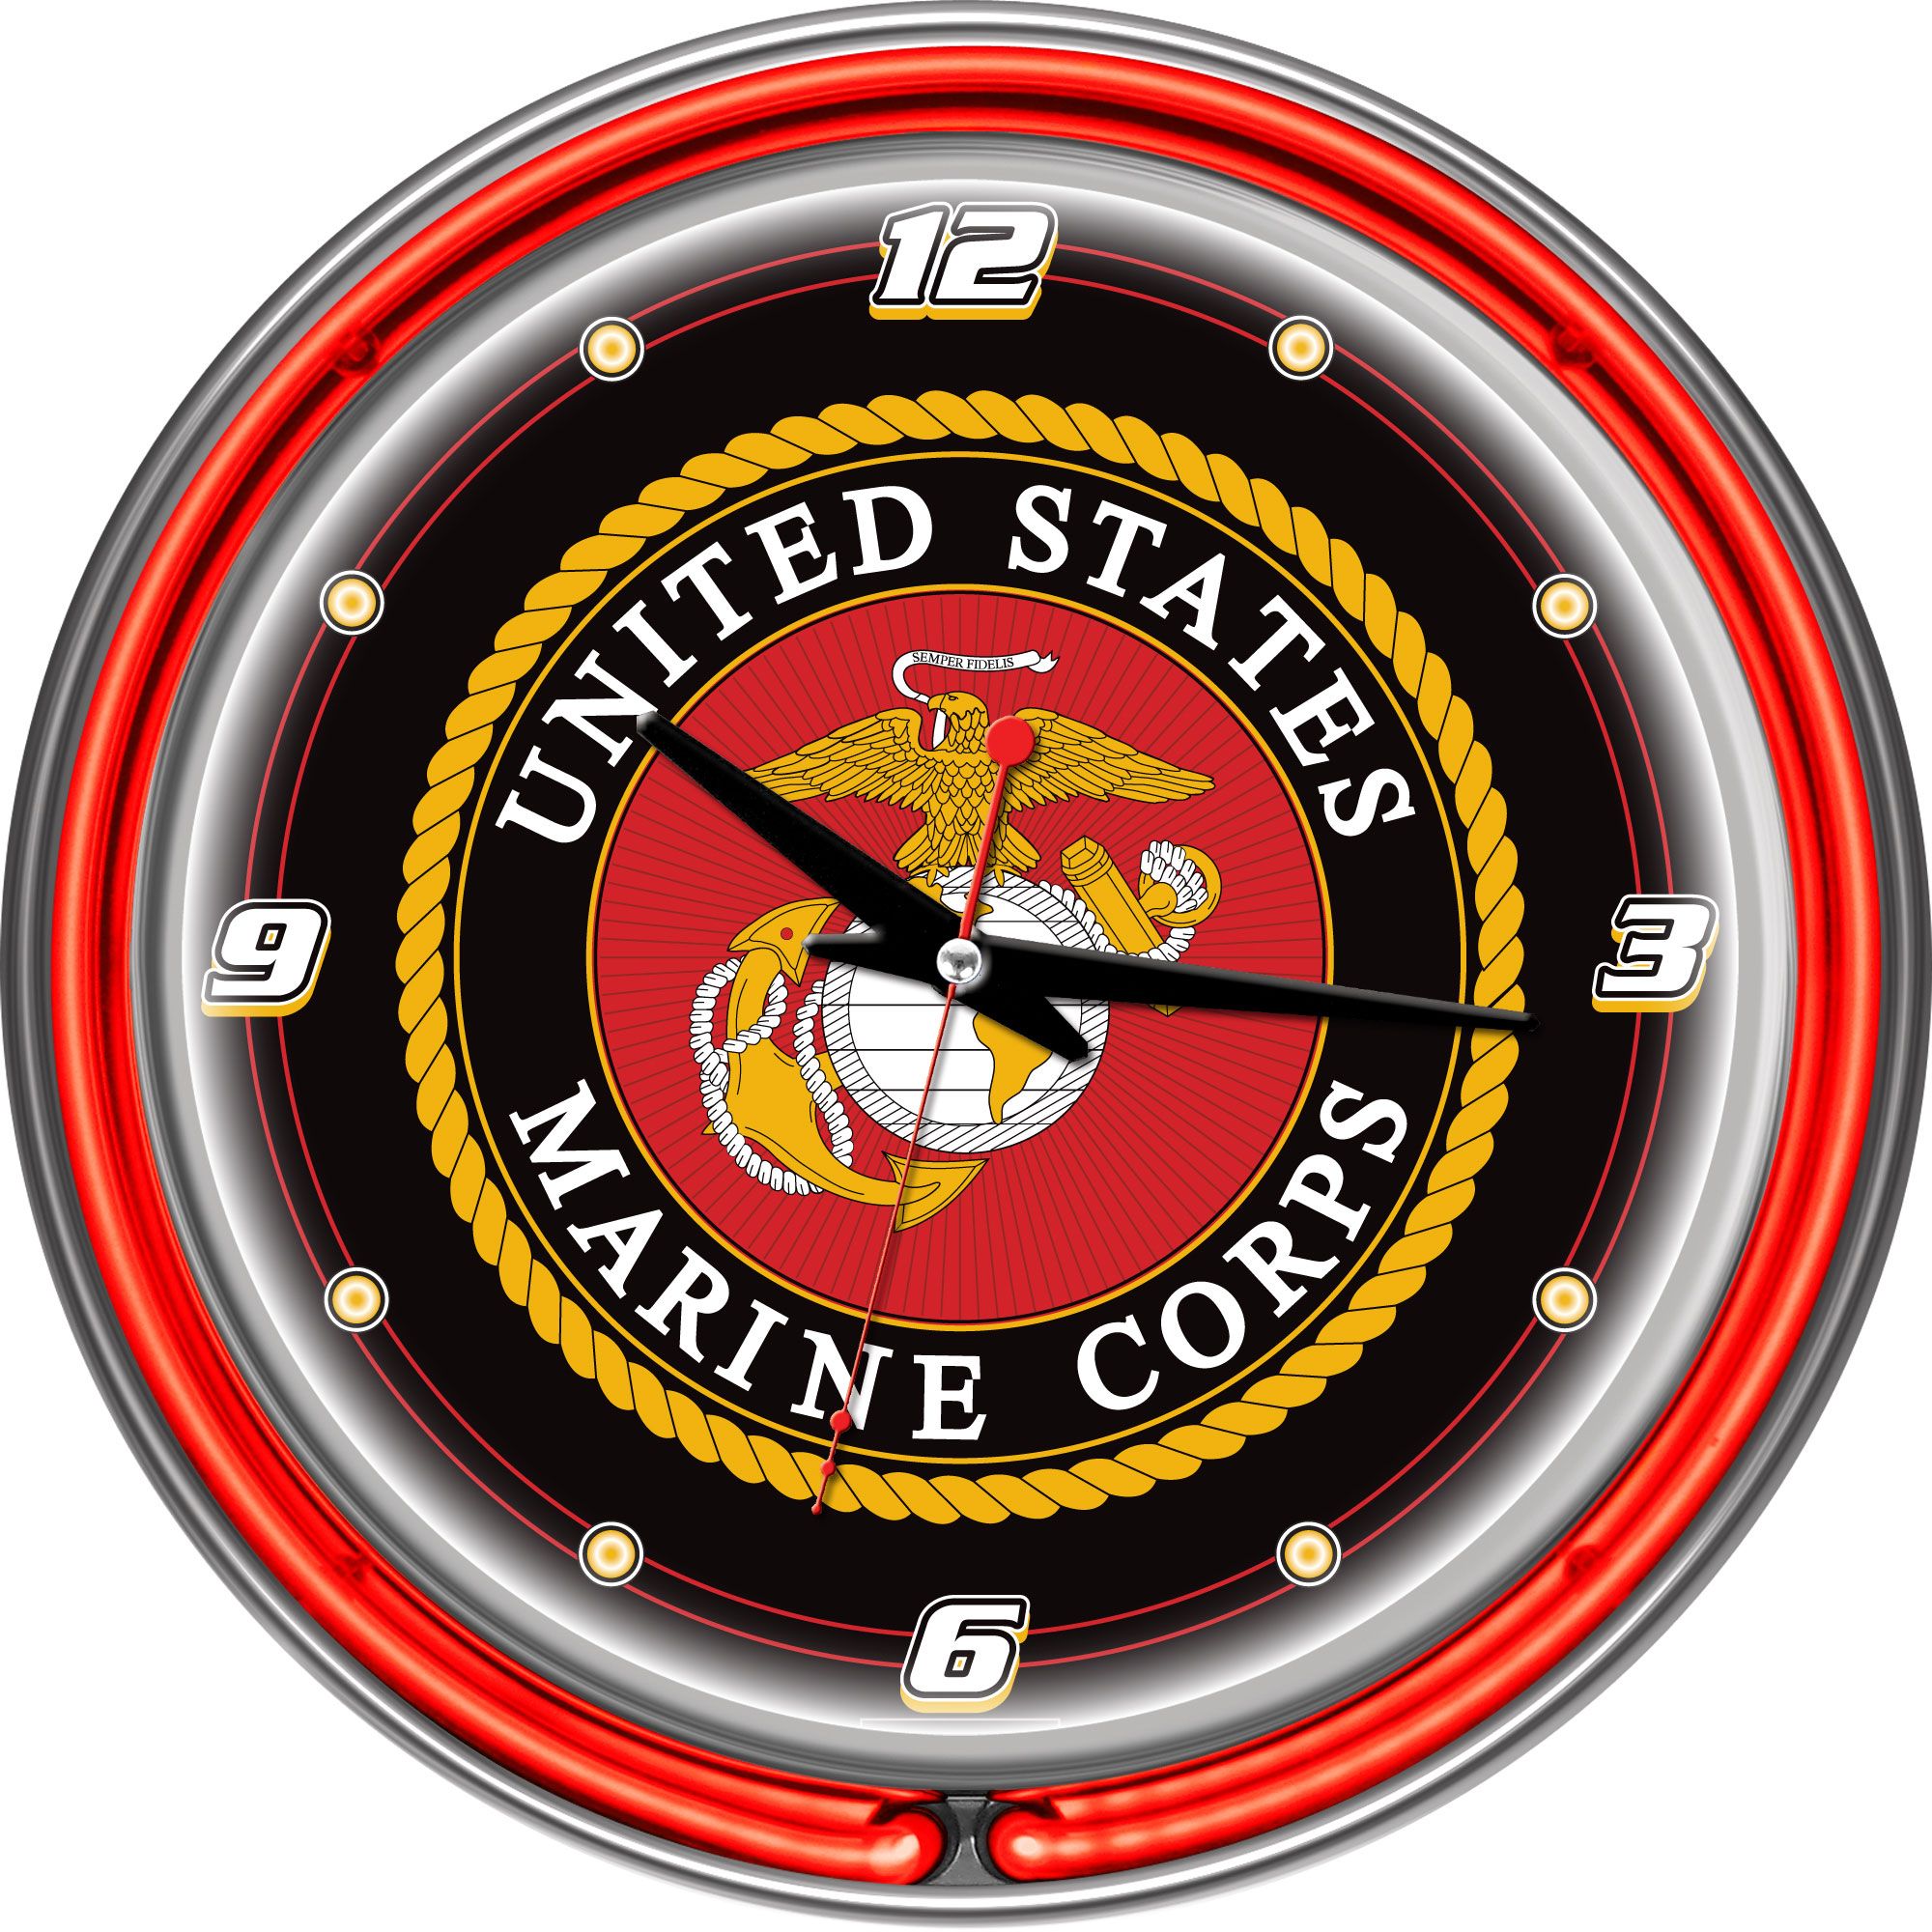 United States Marine Corps Chrome Double Ring Neon Clock